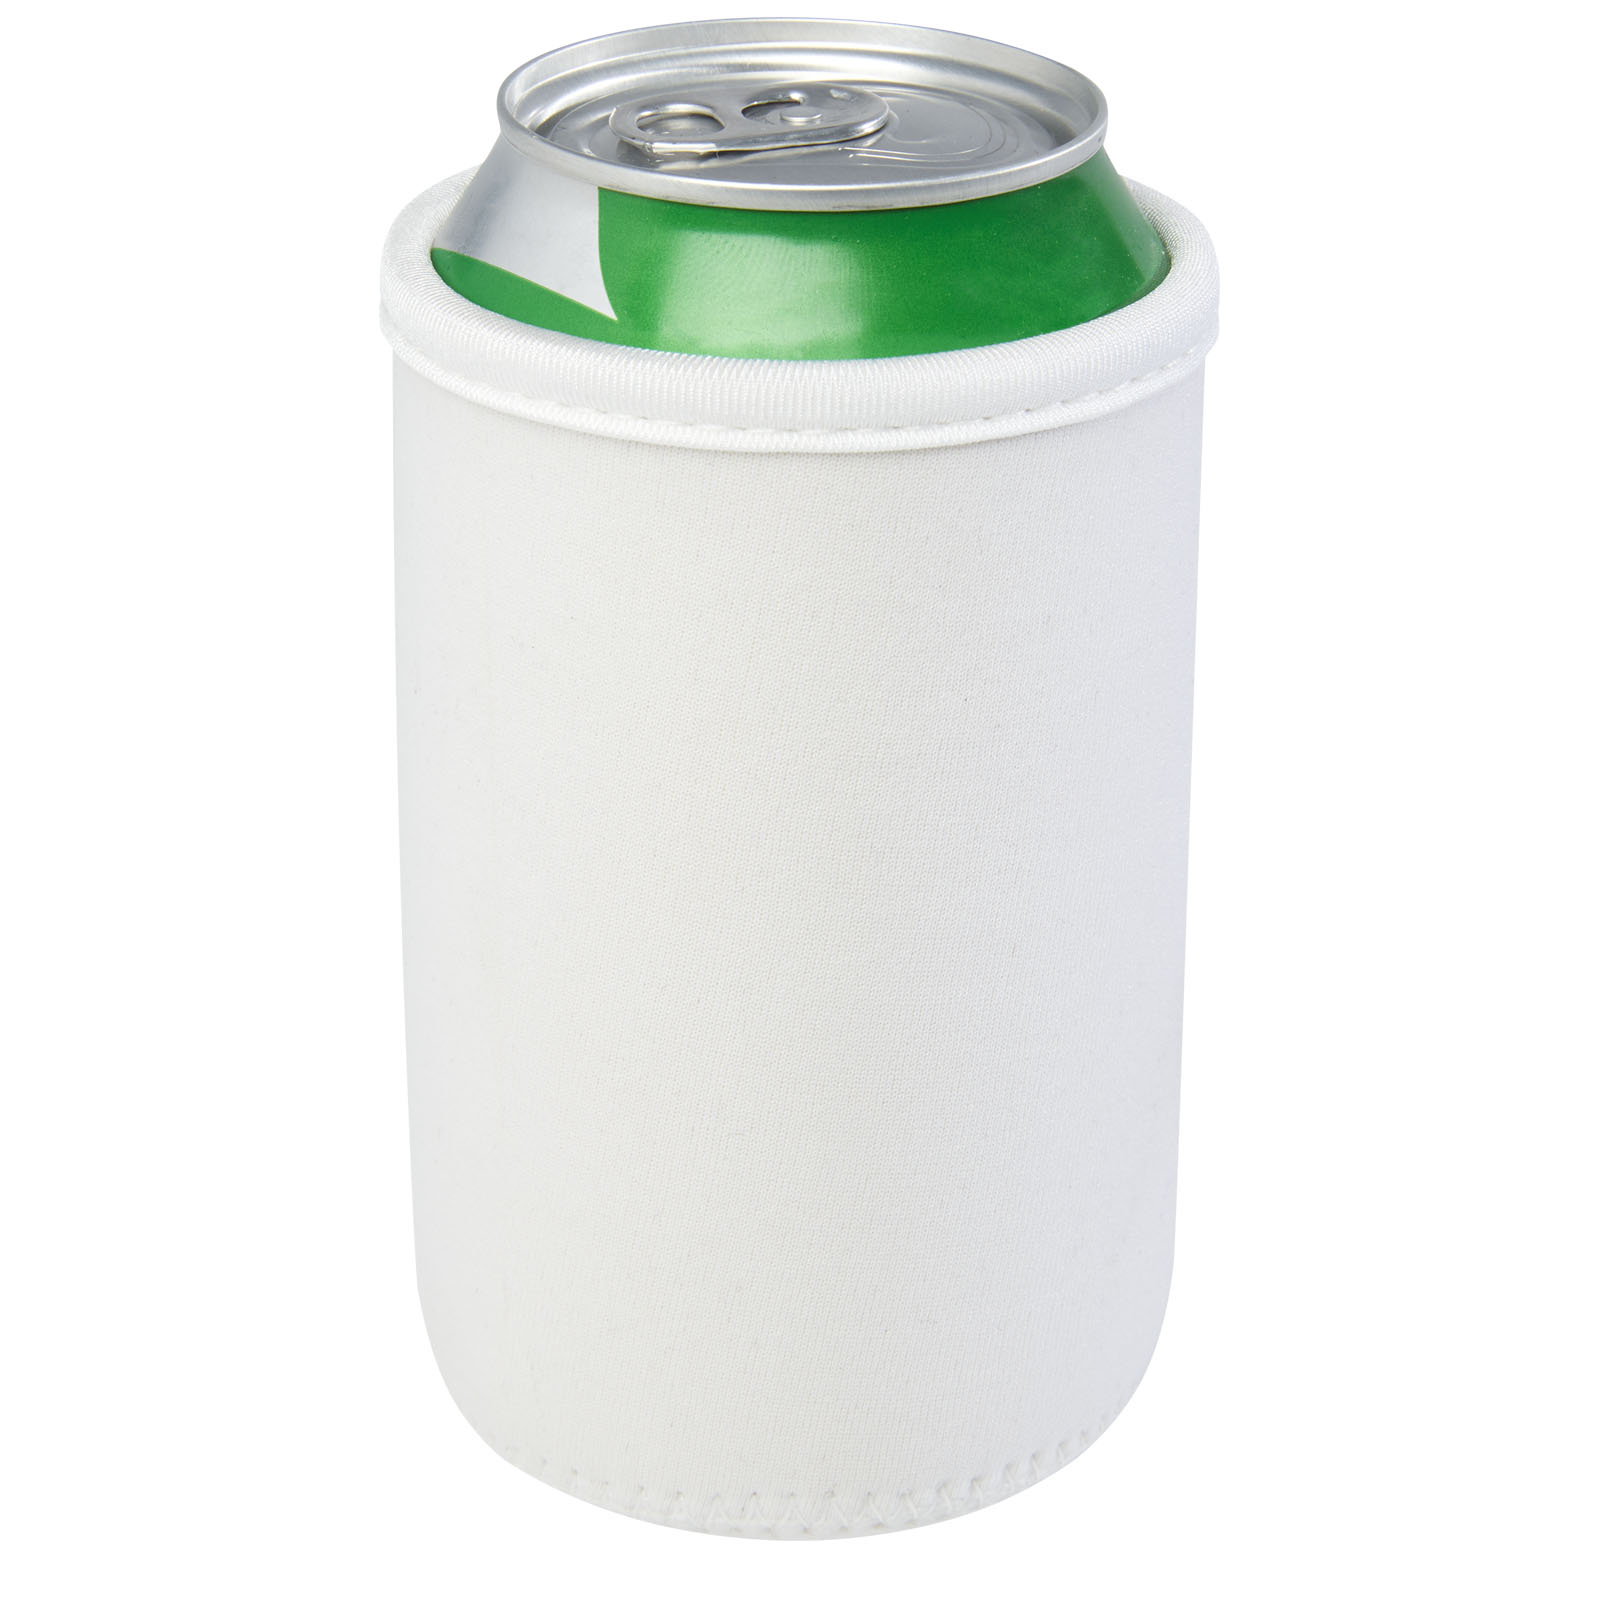 Cooler bags - Vrie recycled neoprene can sleeve holder